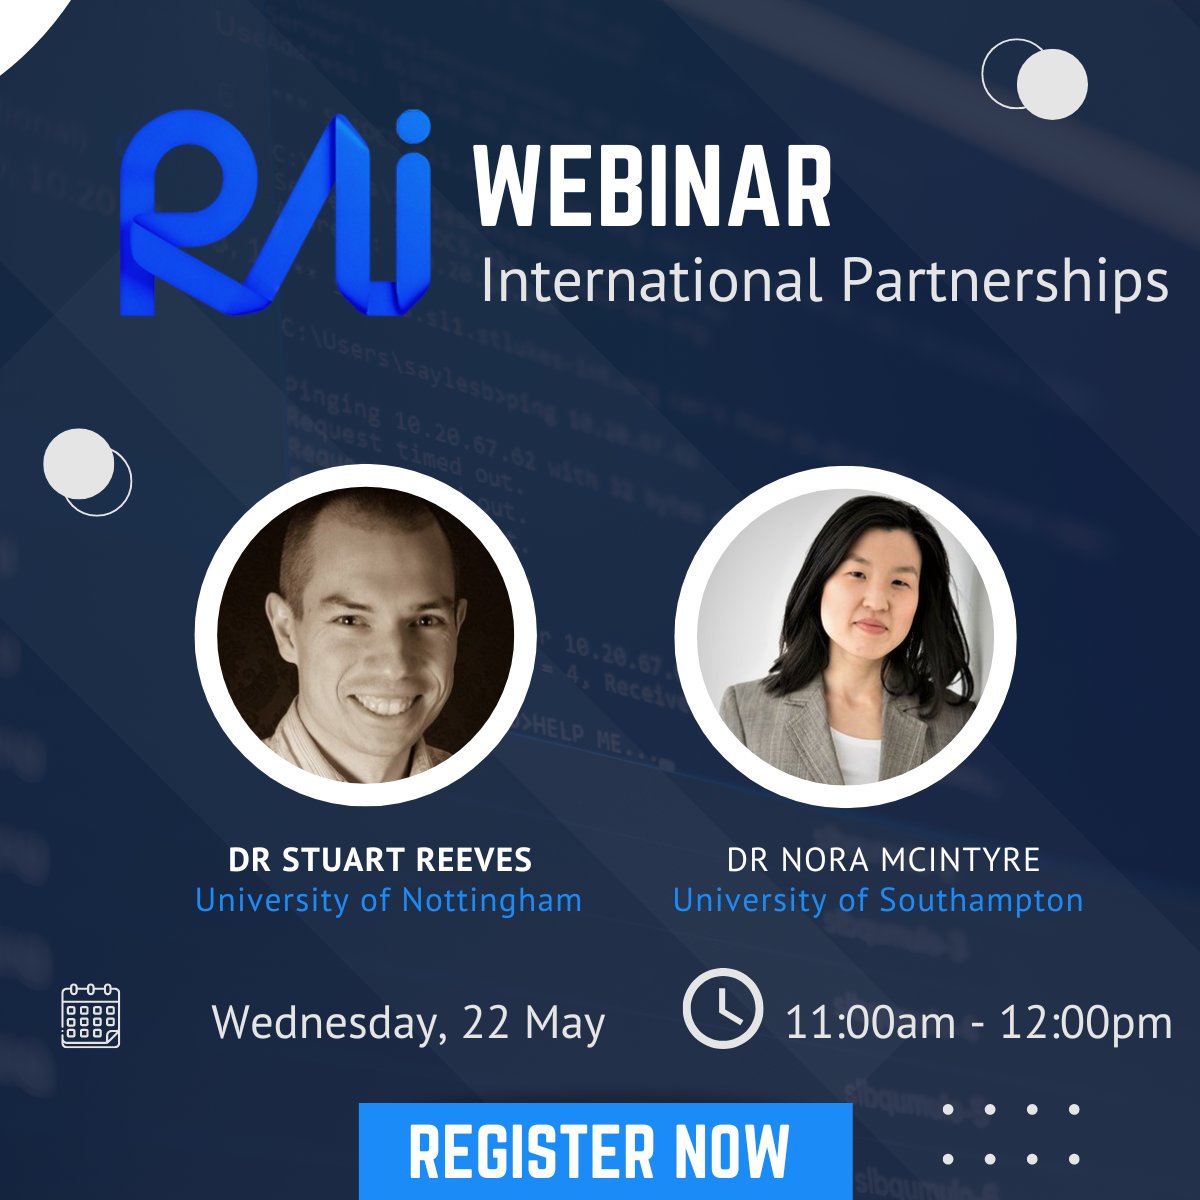 📢 We're thrilled to kick off a new #webinar series featuring our recently funded International Partnerships Projects! Join us online on: 📅 May 22, 2024, 11am-12pm 💻 Register here: events.teams.microsoft.com/event/86556033… About the projects: rai.ac.uk/international-… #ResponsibleAI